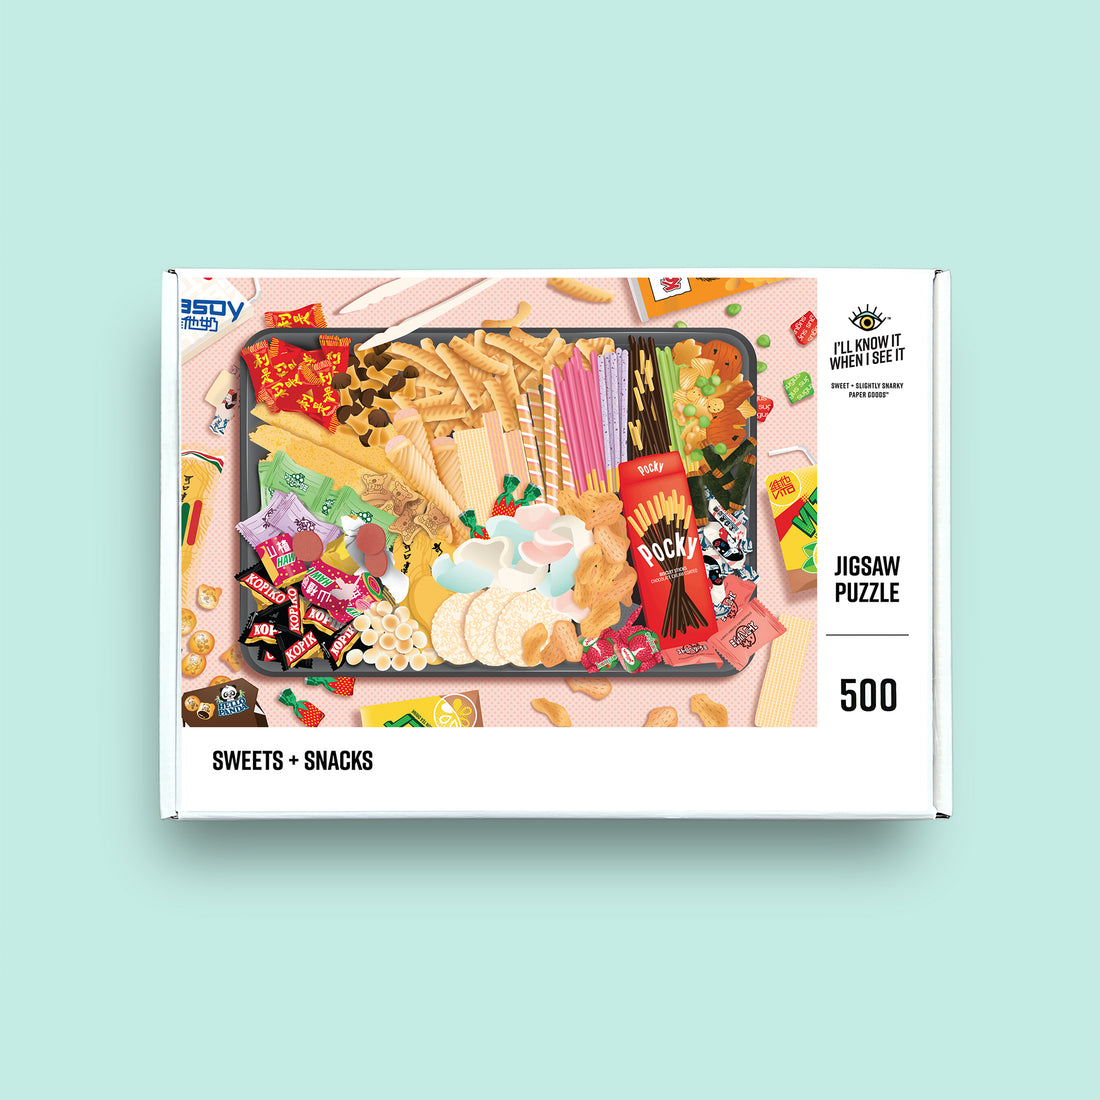 Sweets + snacks jigsaw puzzle